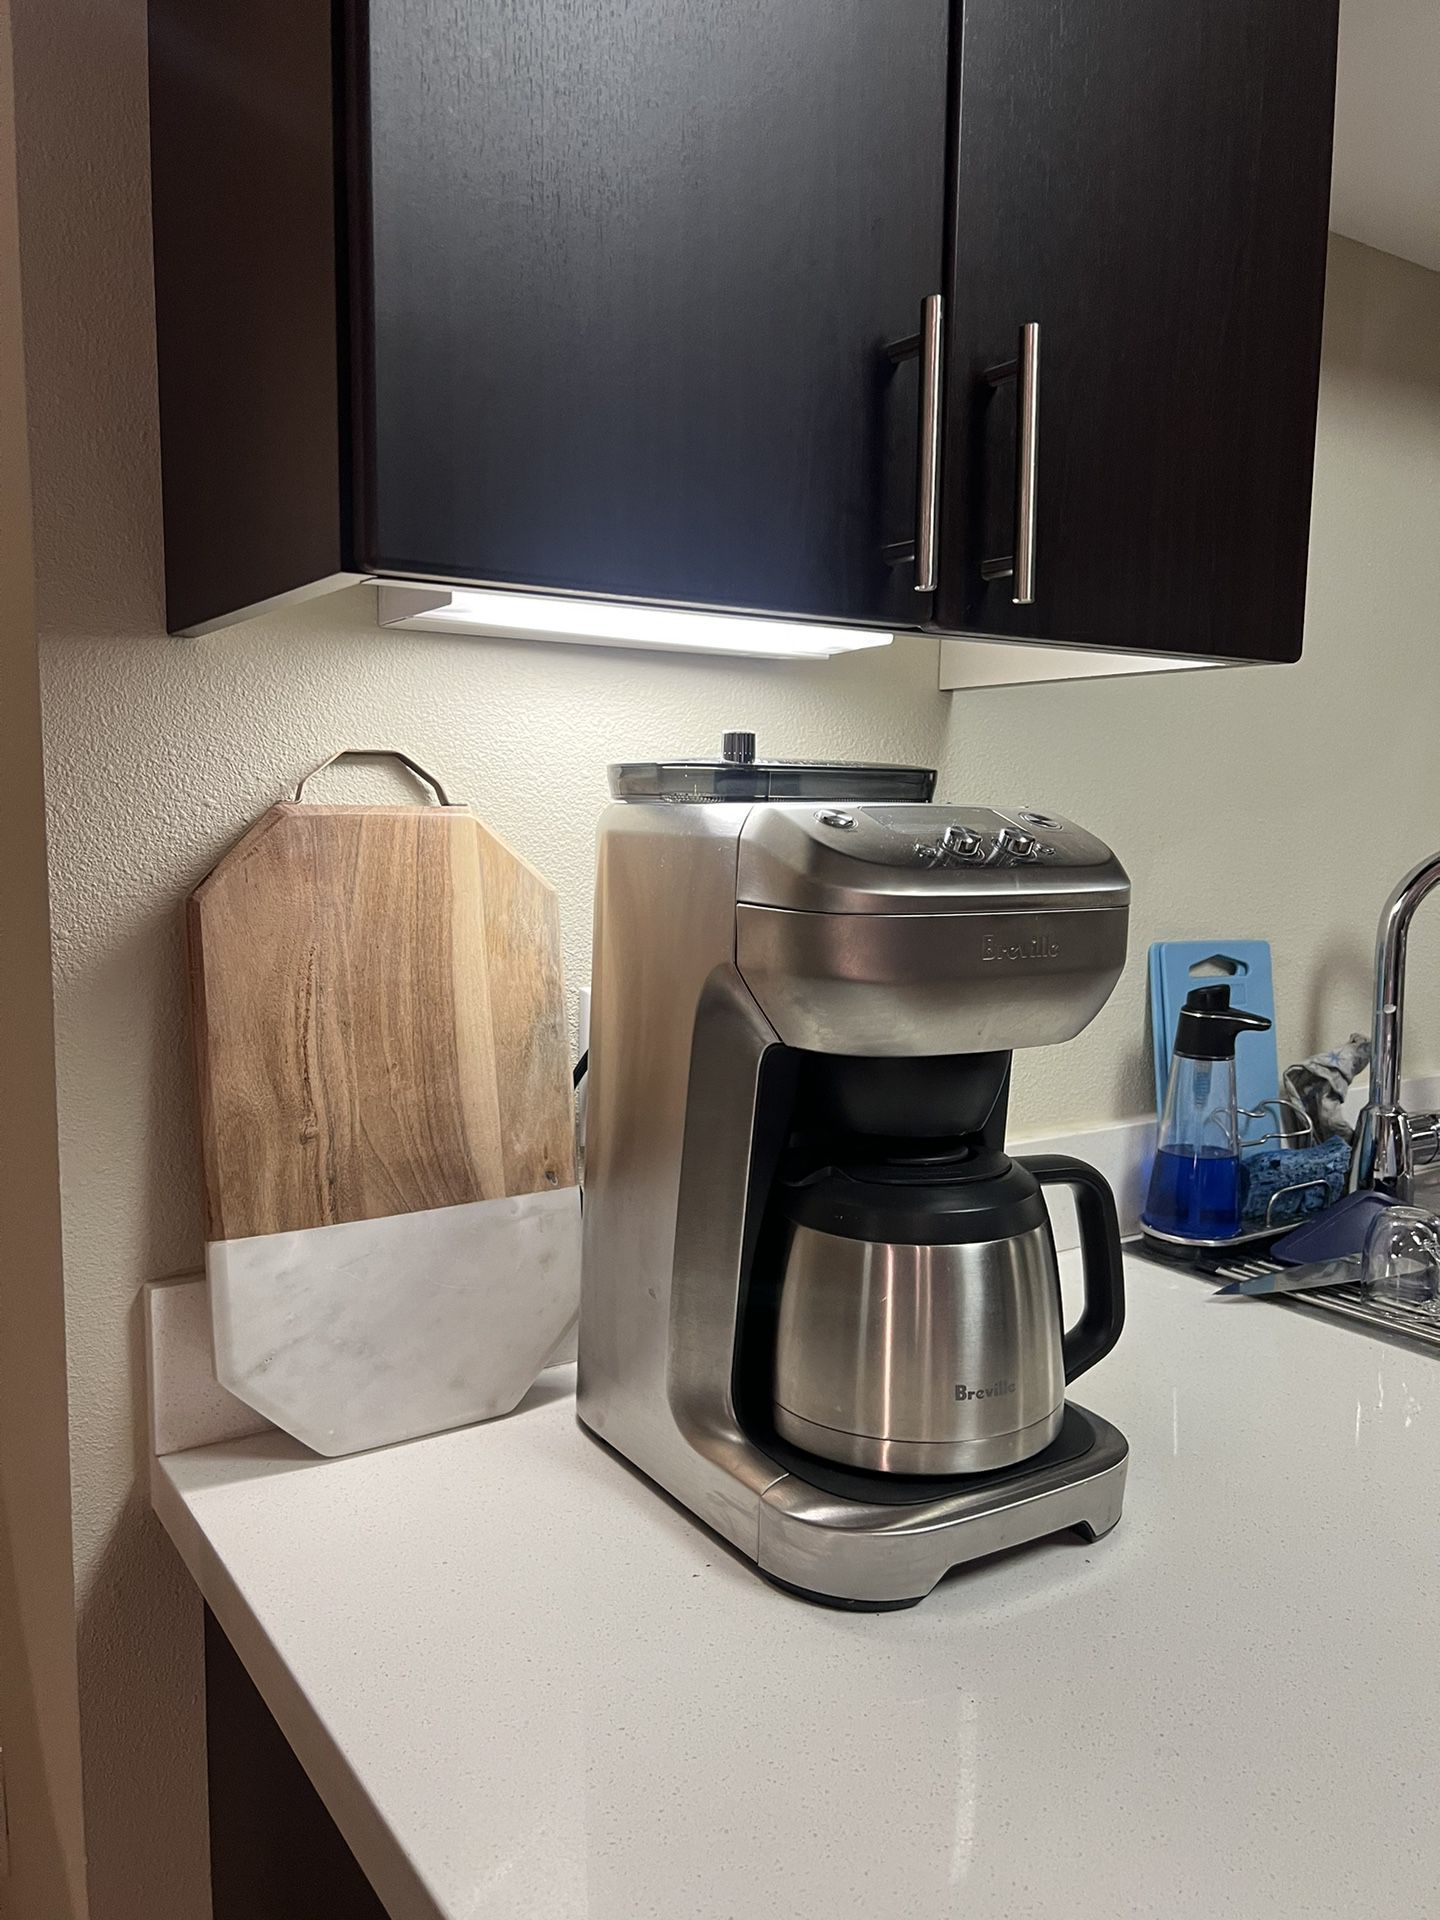 Breville Grind Control 12-Cup Coffee Maker for Sale in San Jose